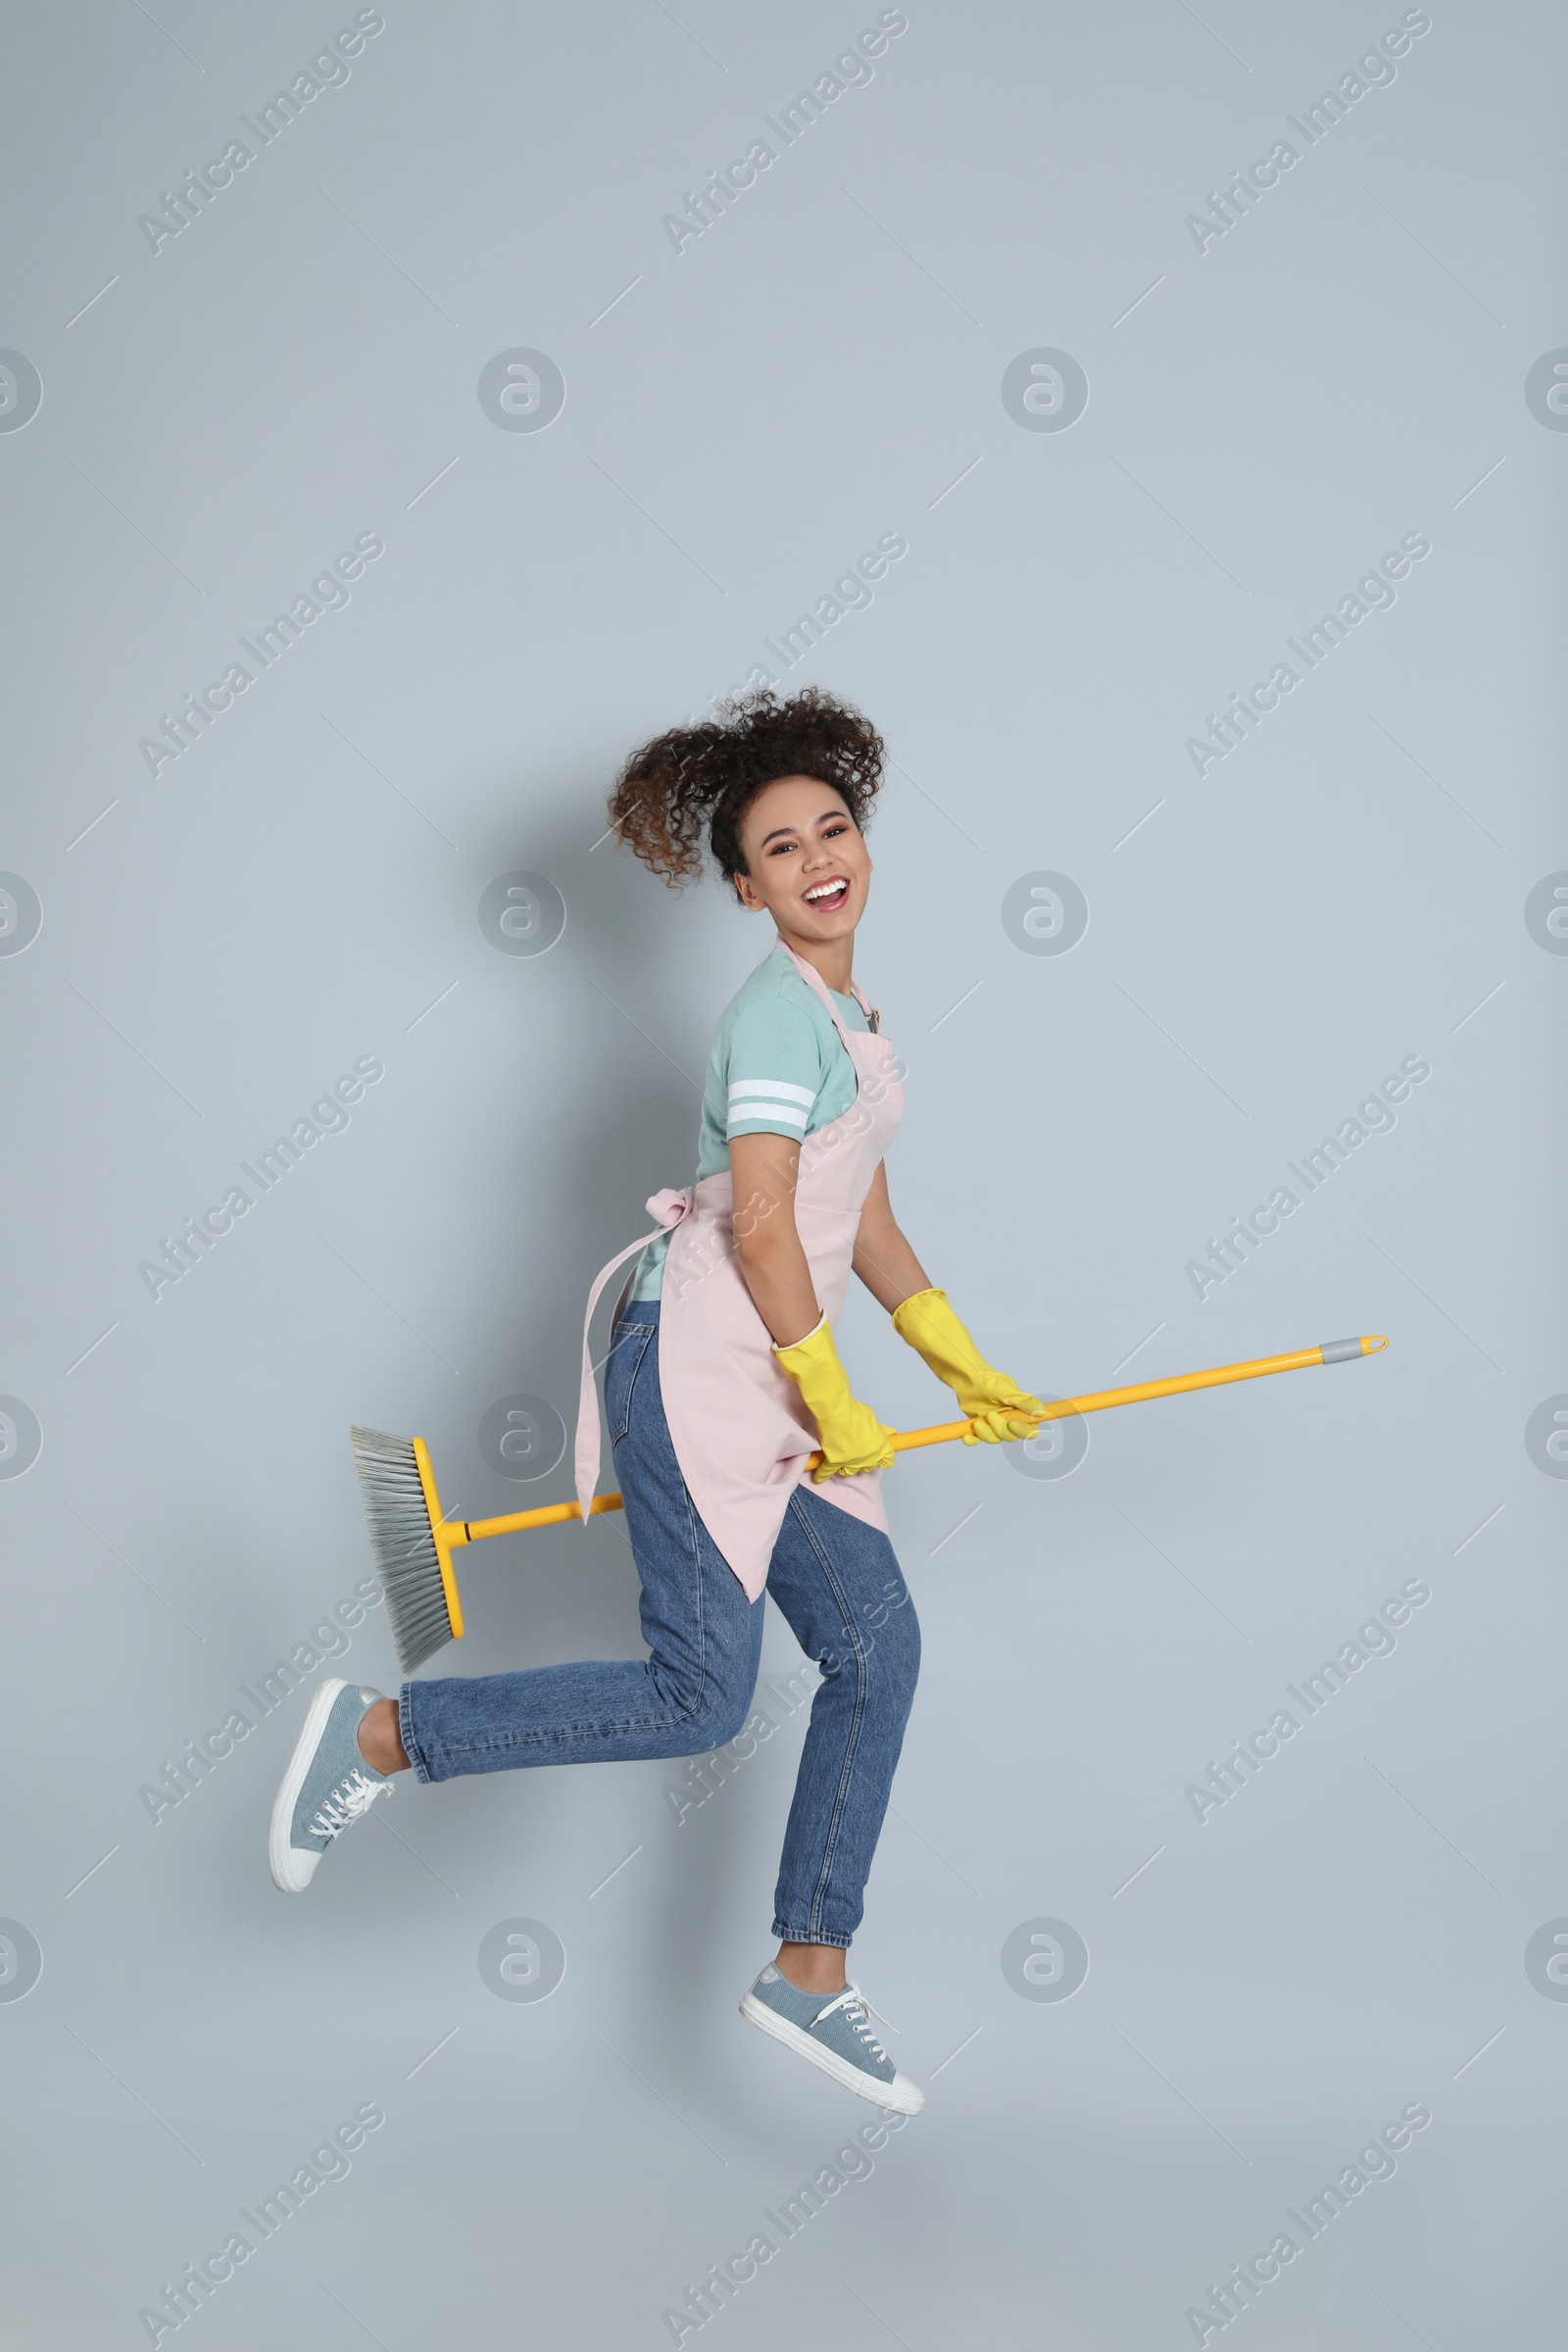 Photo of African American woman with yellow broom jumping on grey background